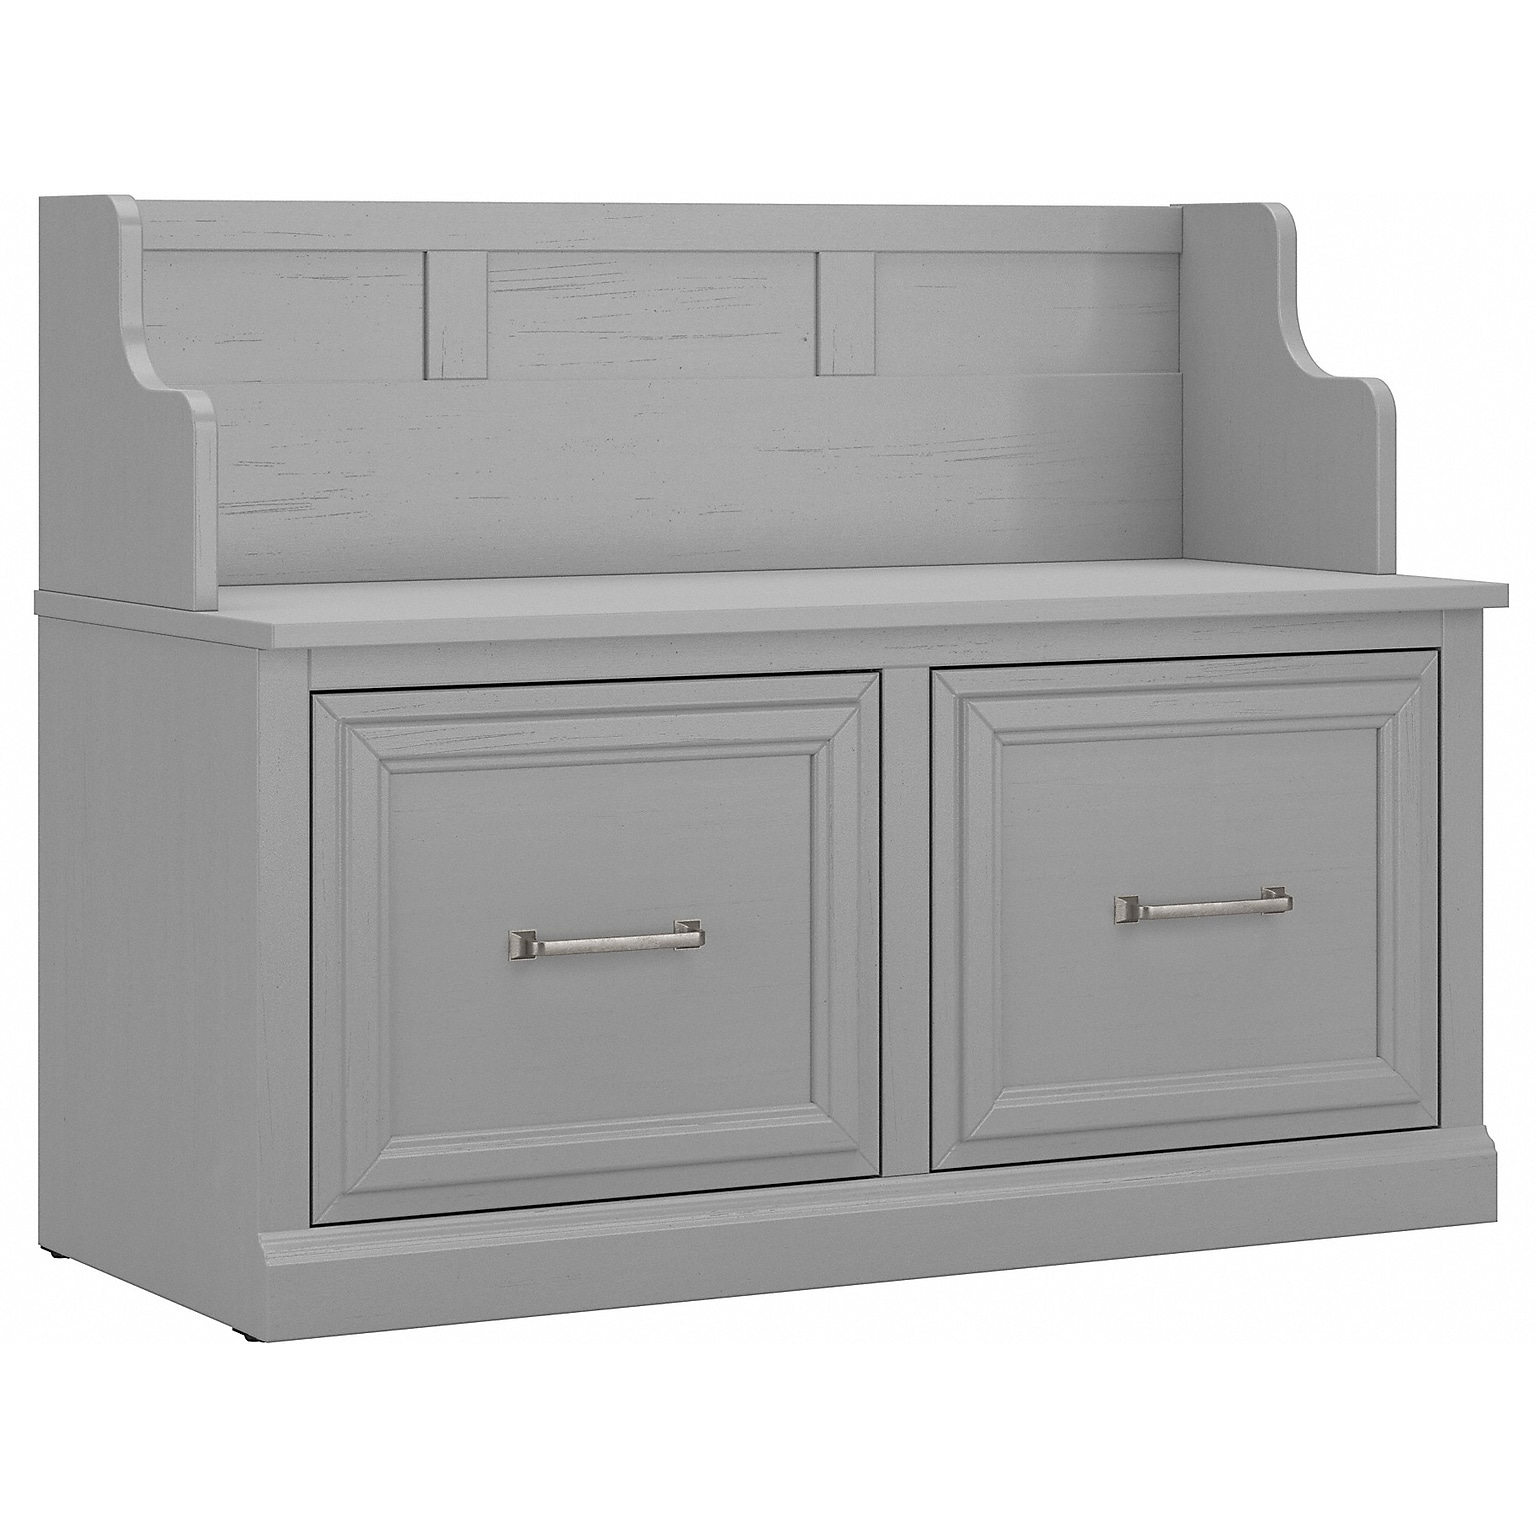 kathy ireland® Home by Bush Furniture Woodland 32 Entryway Bench with Doors, Cape Cod Gray (WDL005CG)